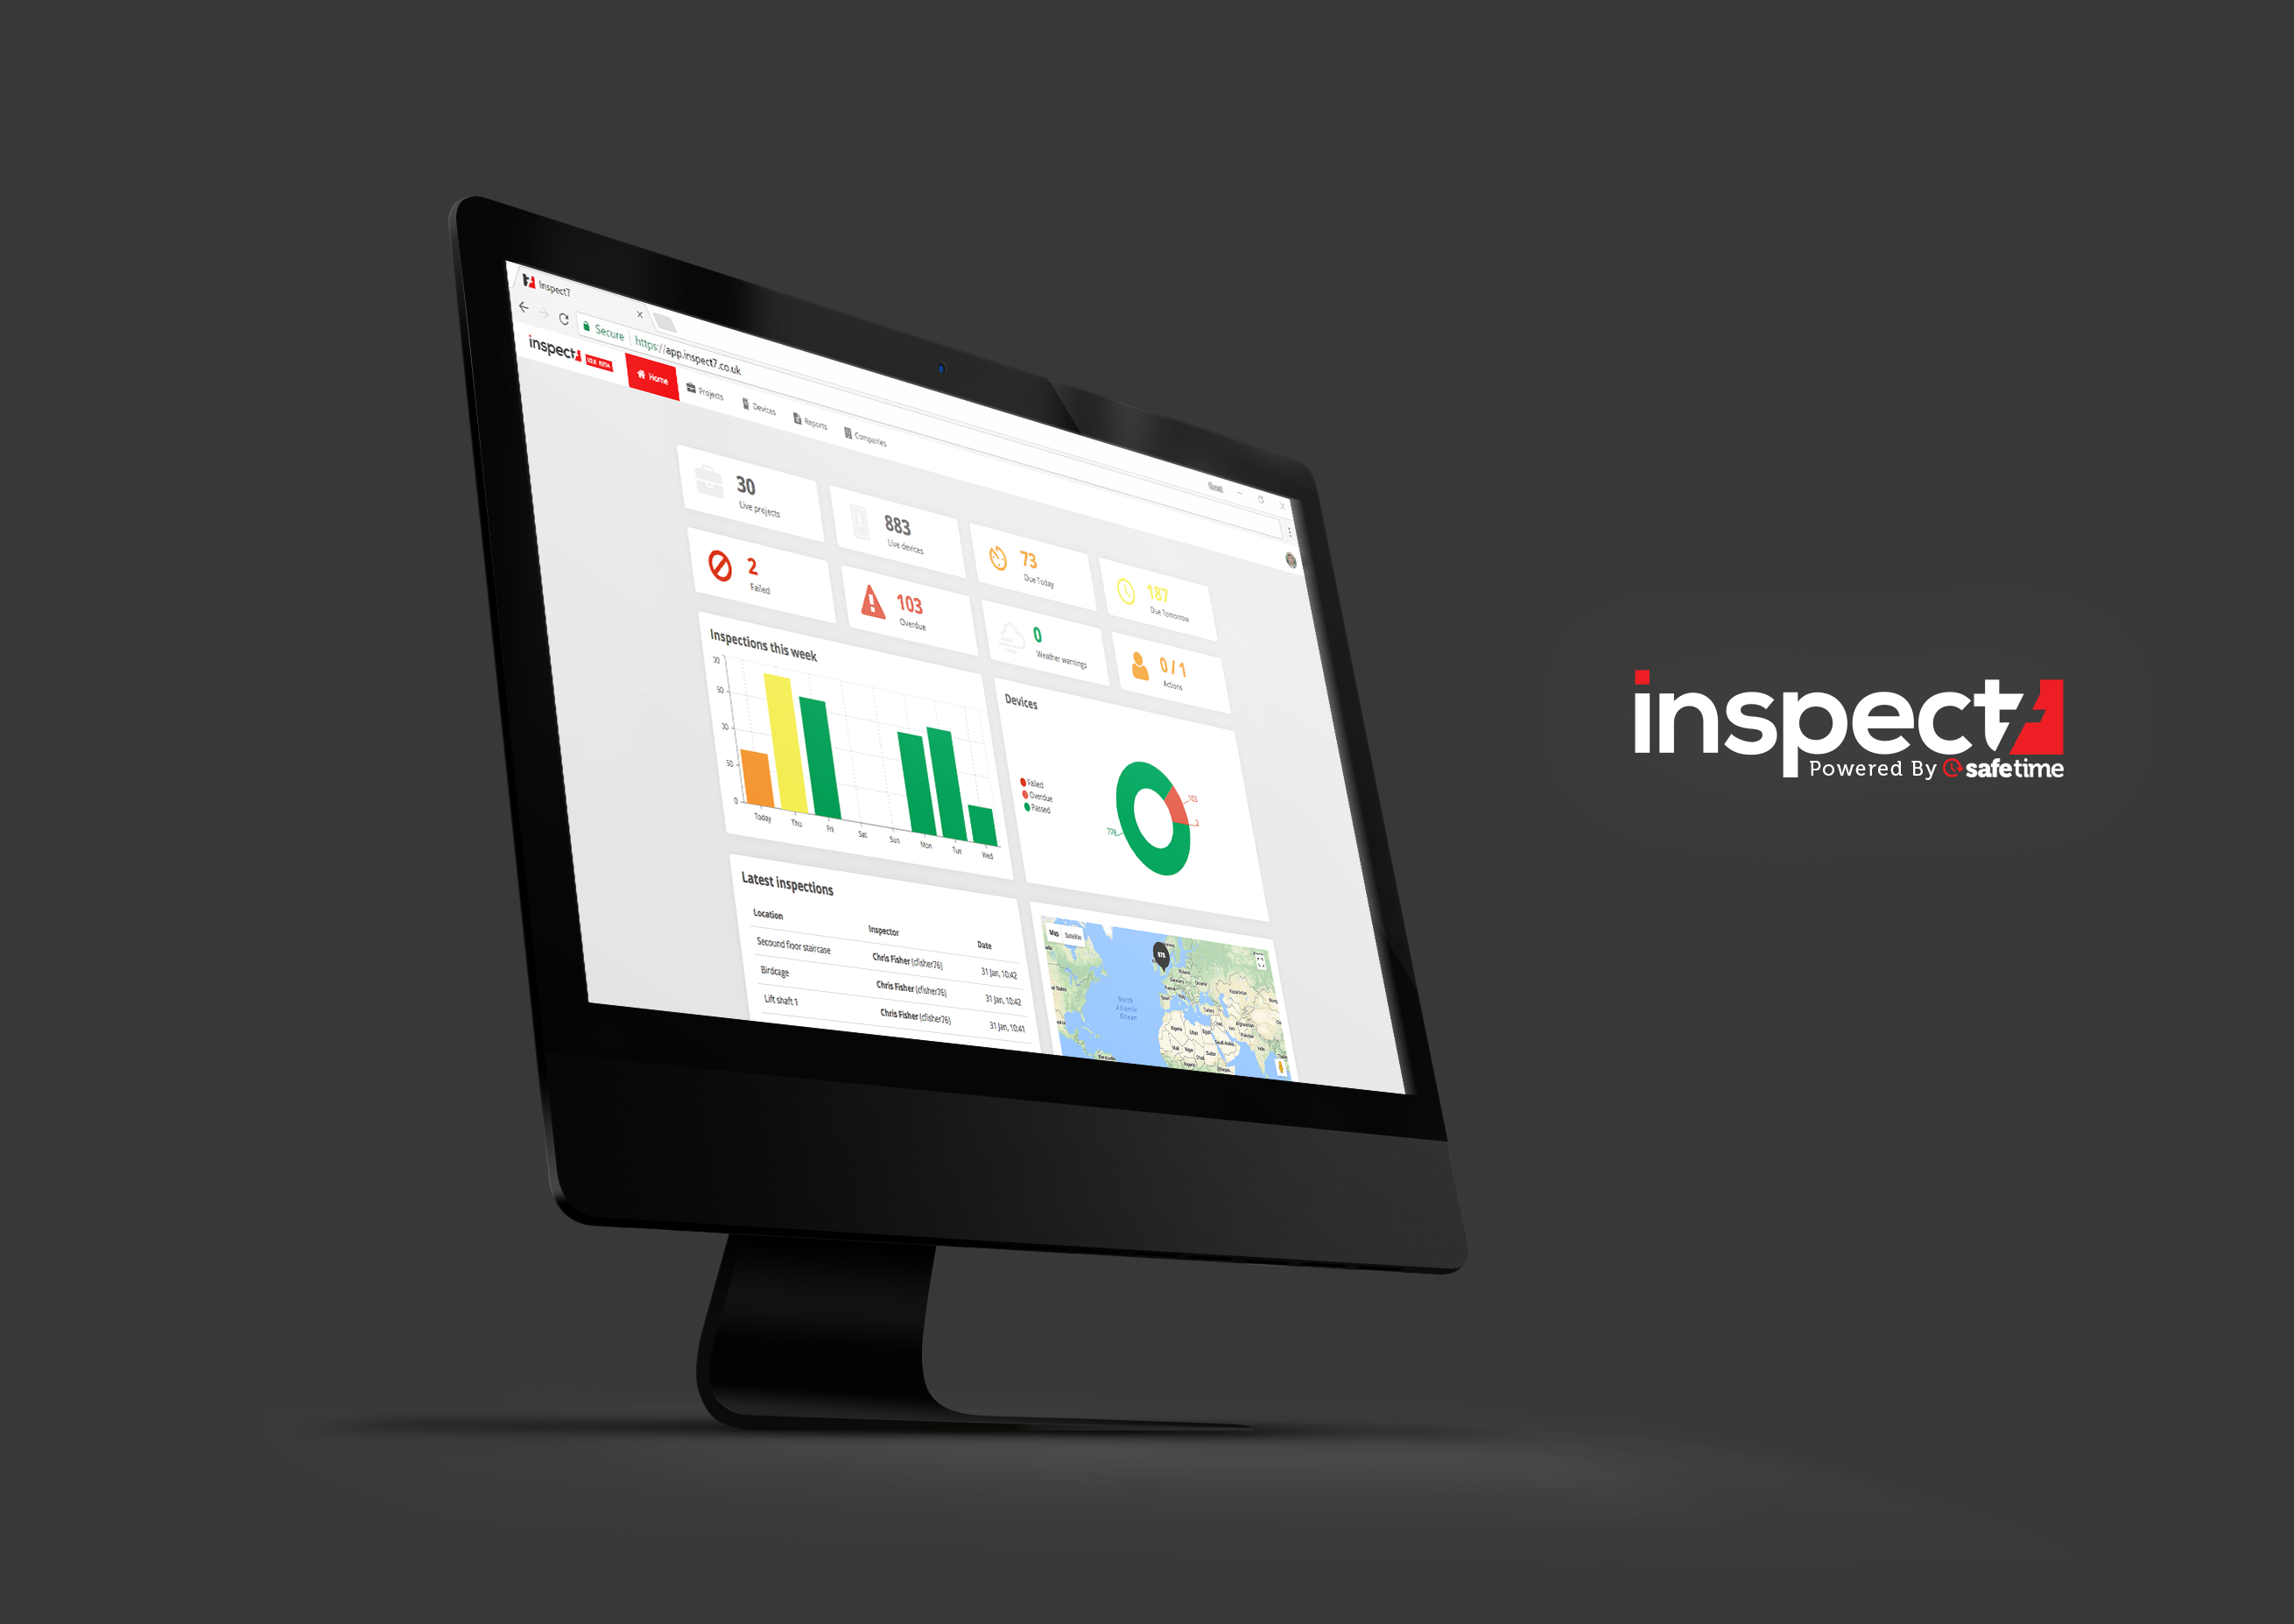 promo image of the inspect7 portal dashboard